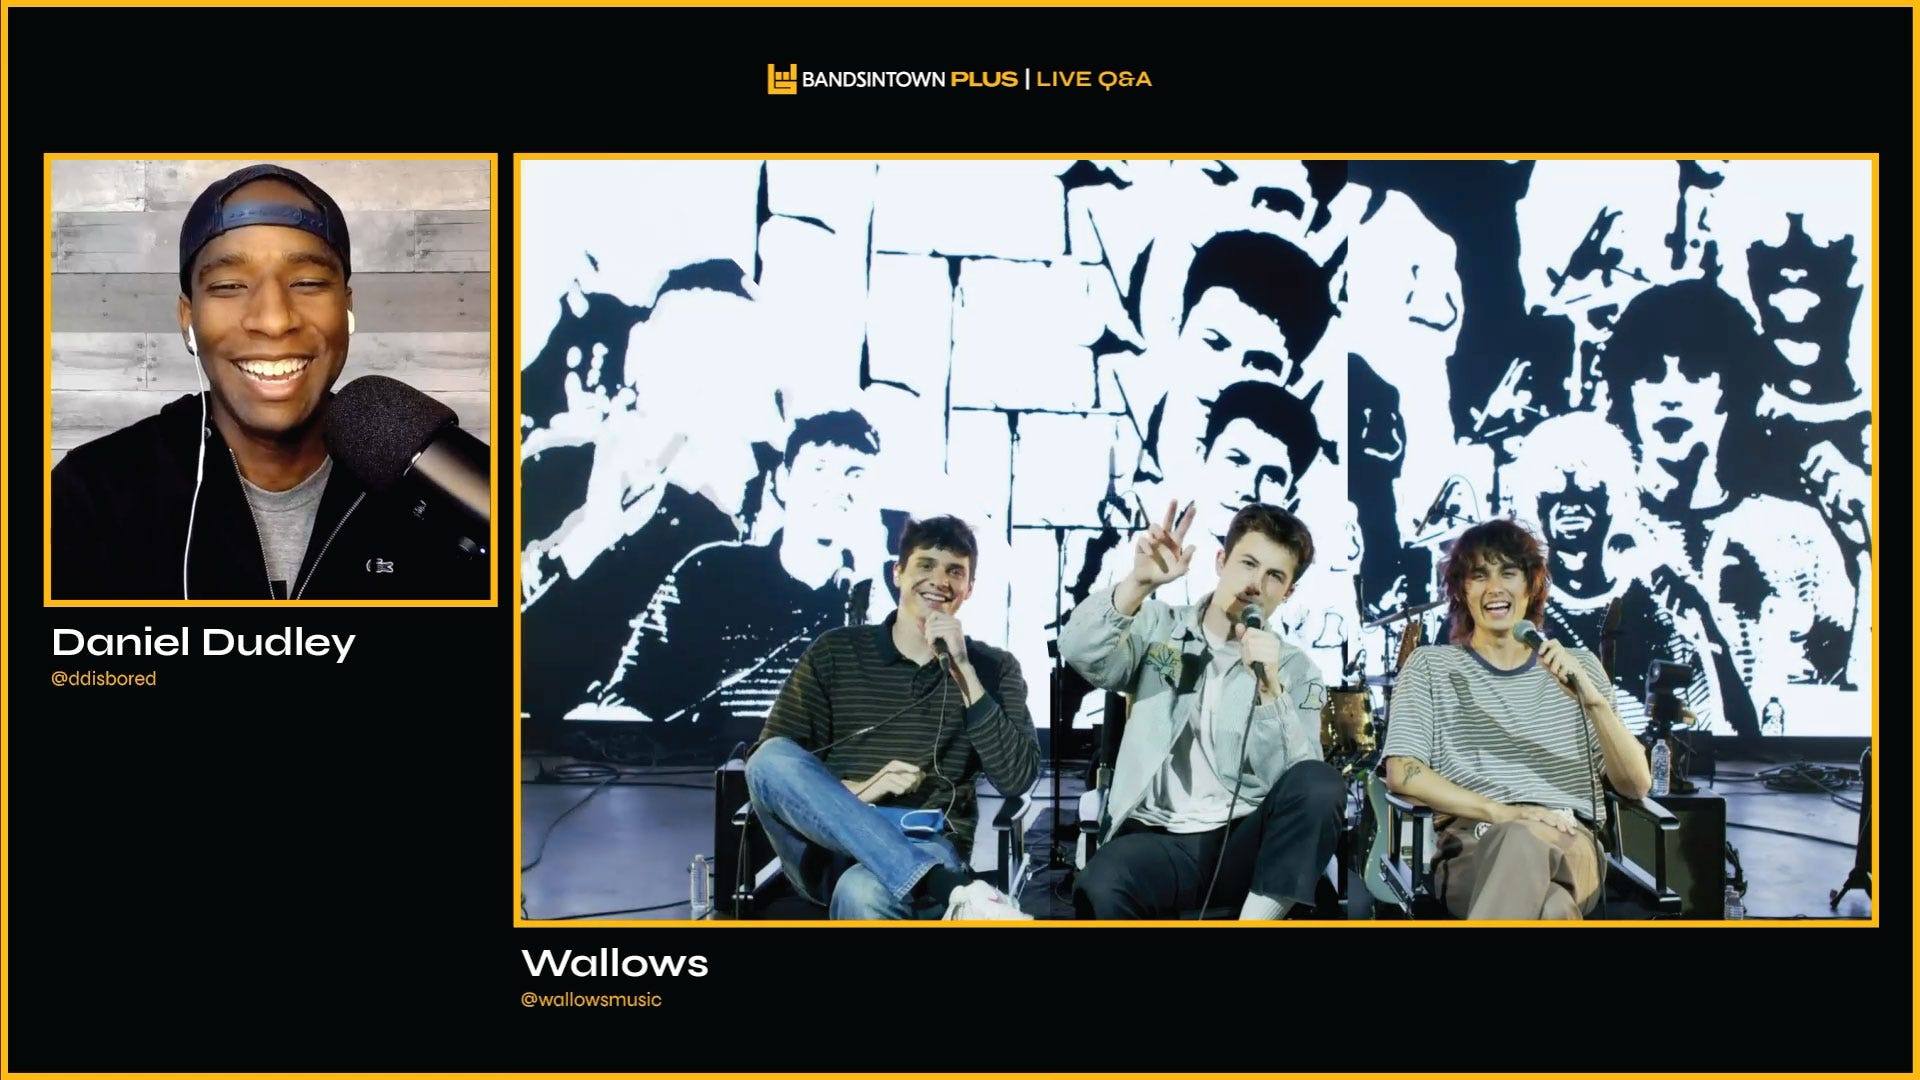 The band Wallows interviewed after a live streamed show by Bandsintown Plus host Daniel Dudley on Feb. 19, 2021.